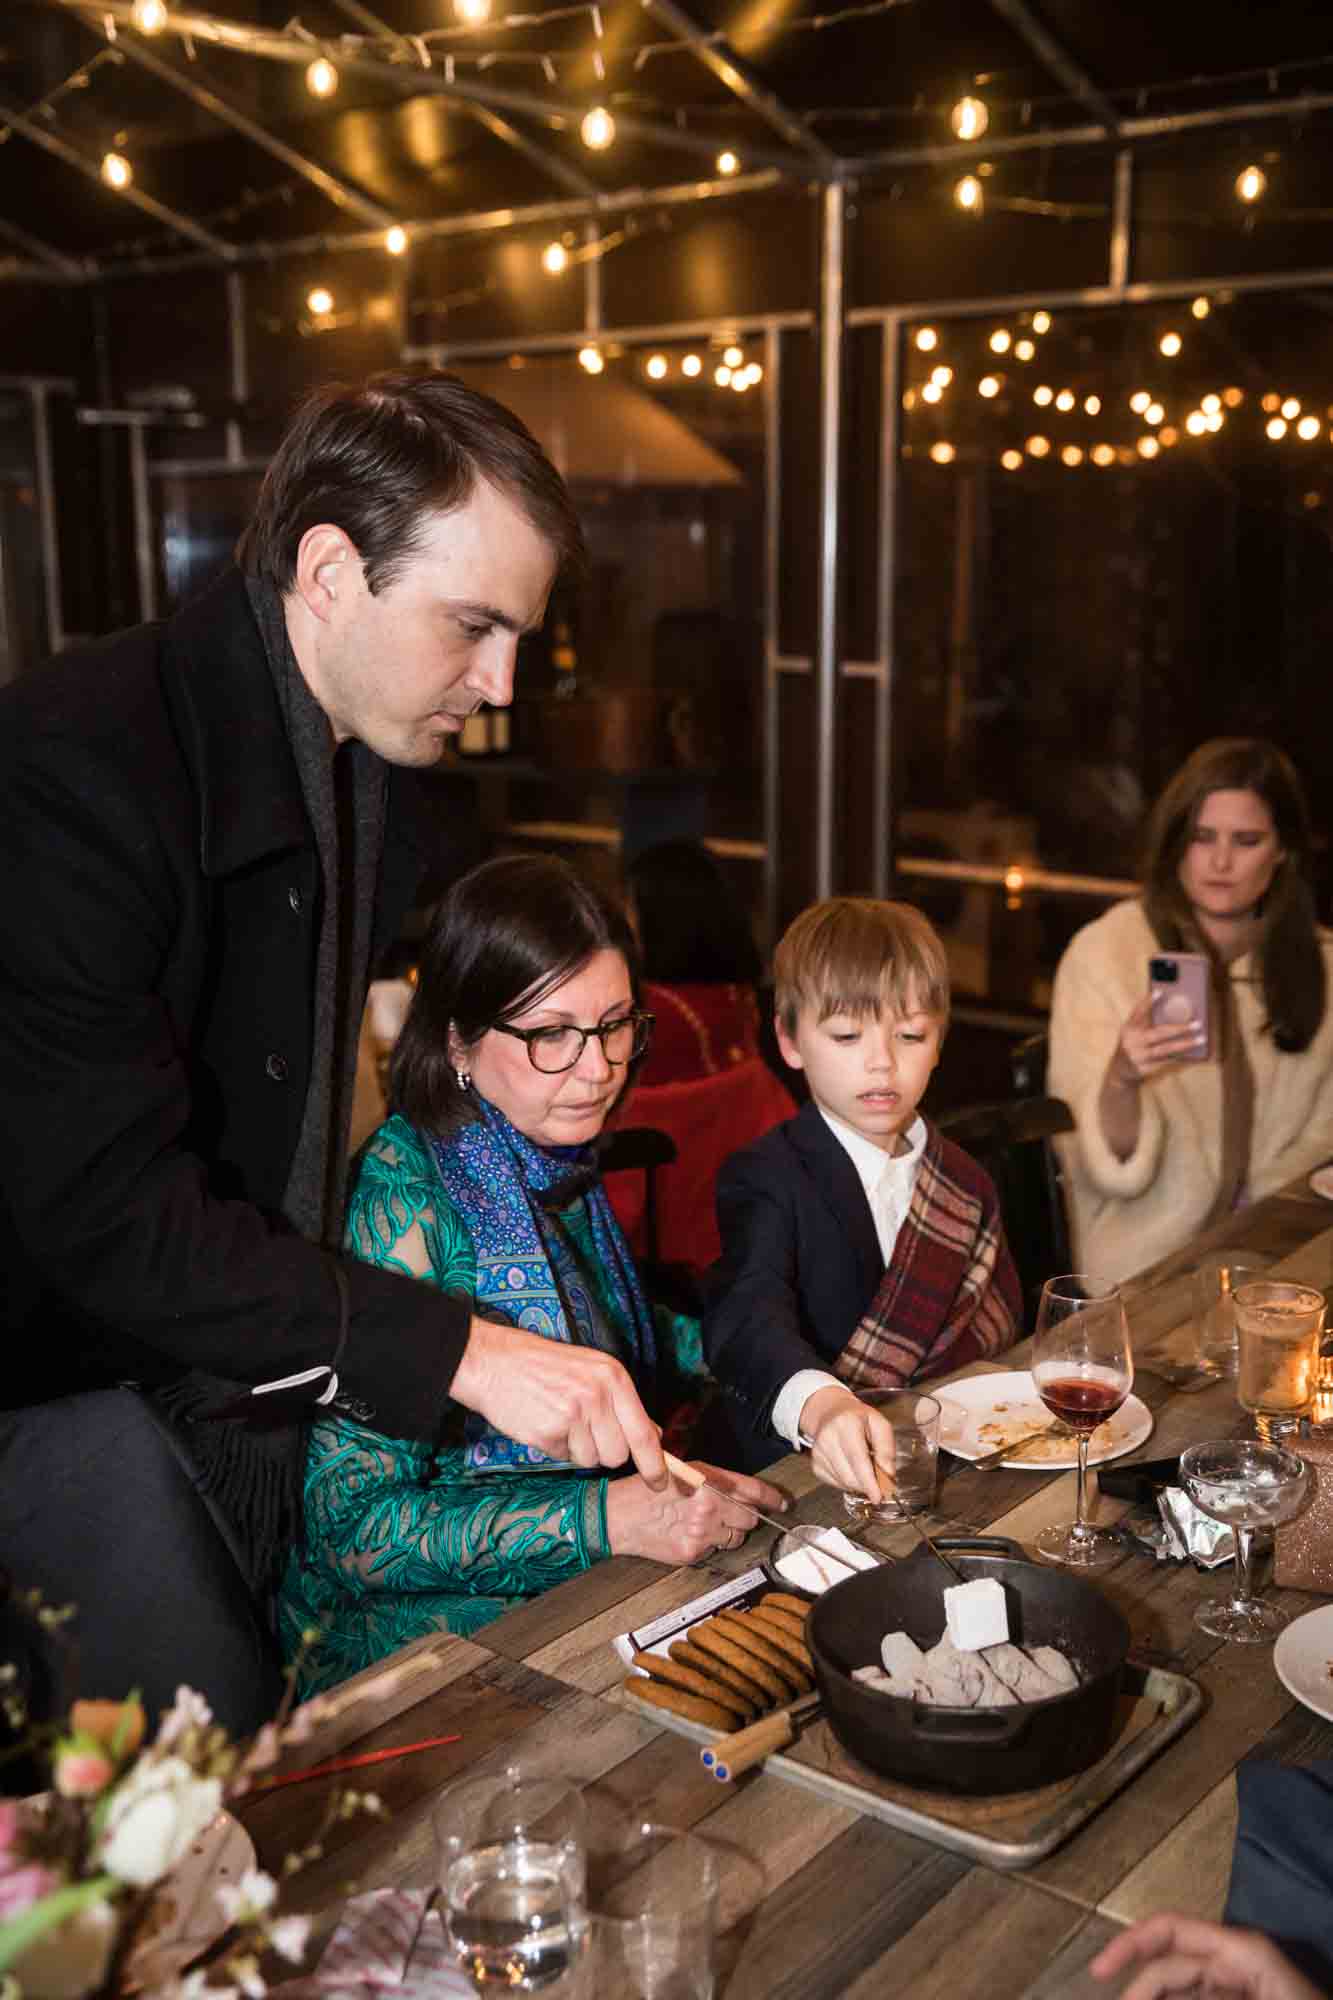 Guests eating s'mores at a Brooklyn restaurant wedding